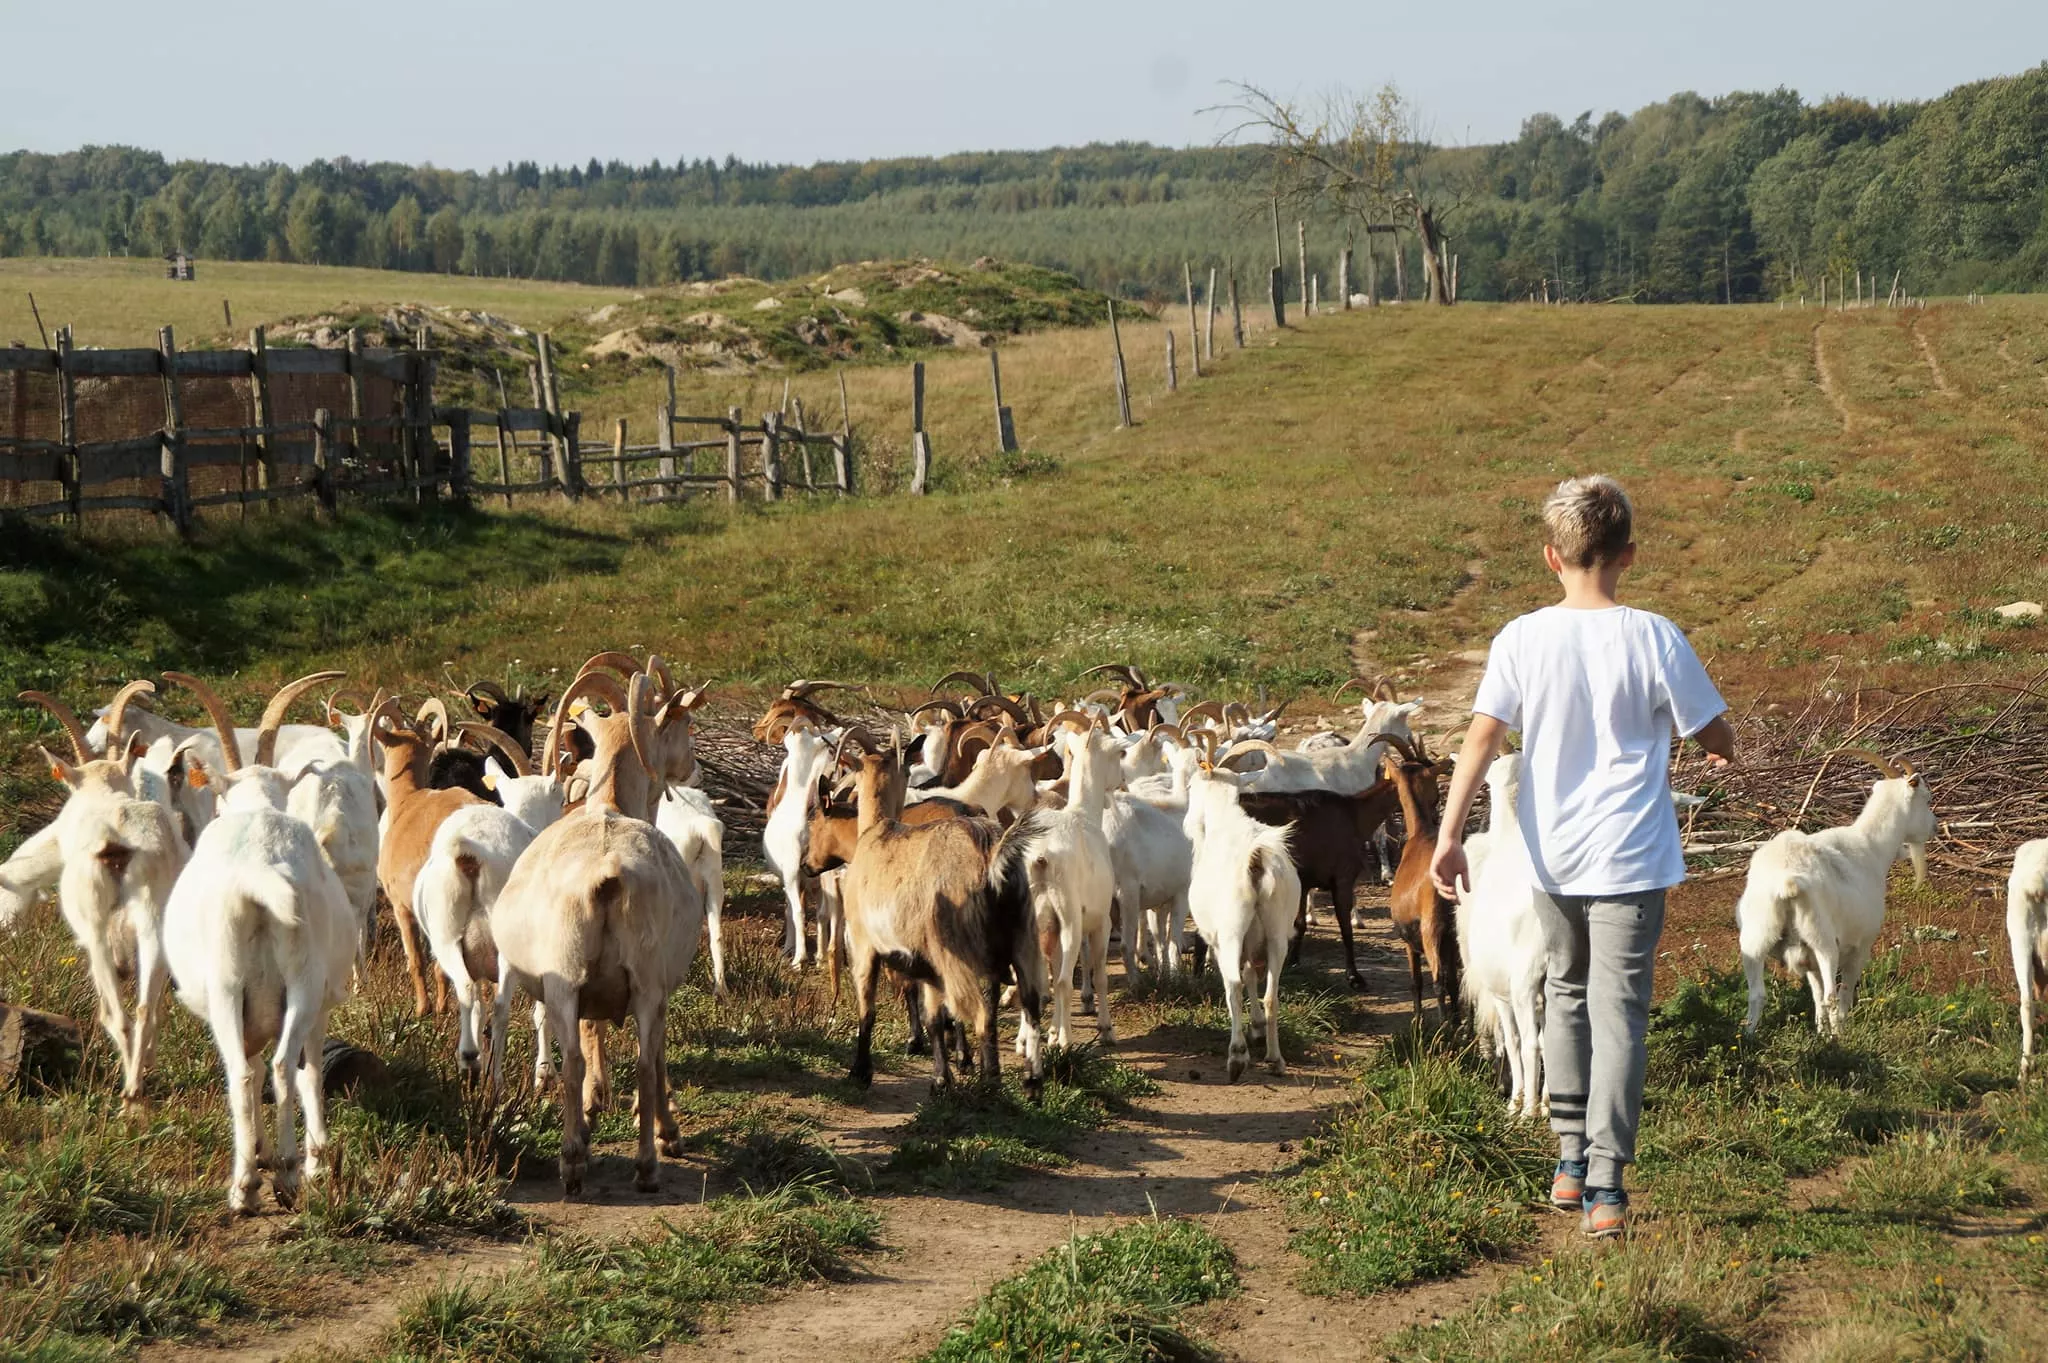 Zlotna Goat Farm in Poland, Europe | Cheesemakers - Rated 1